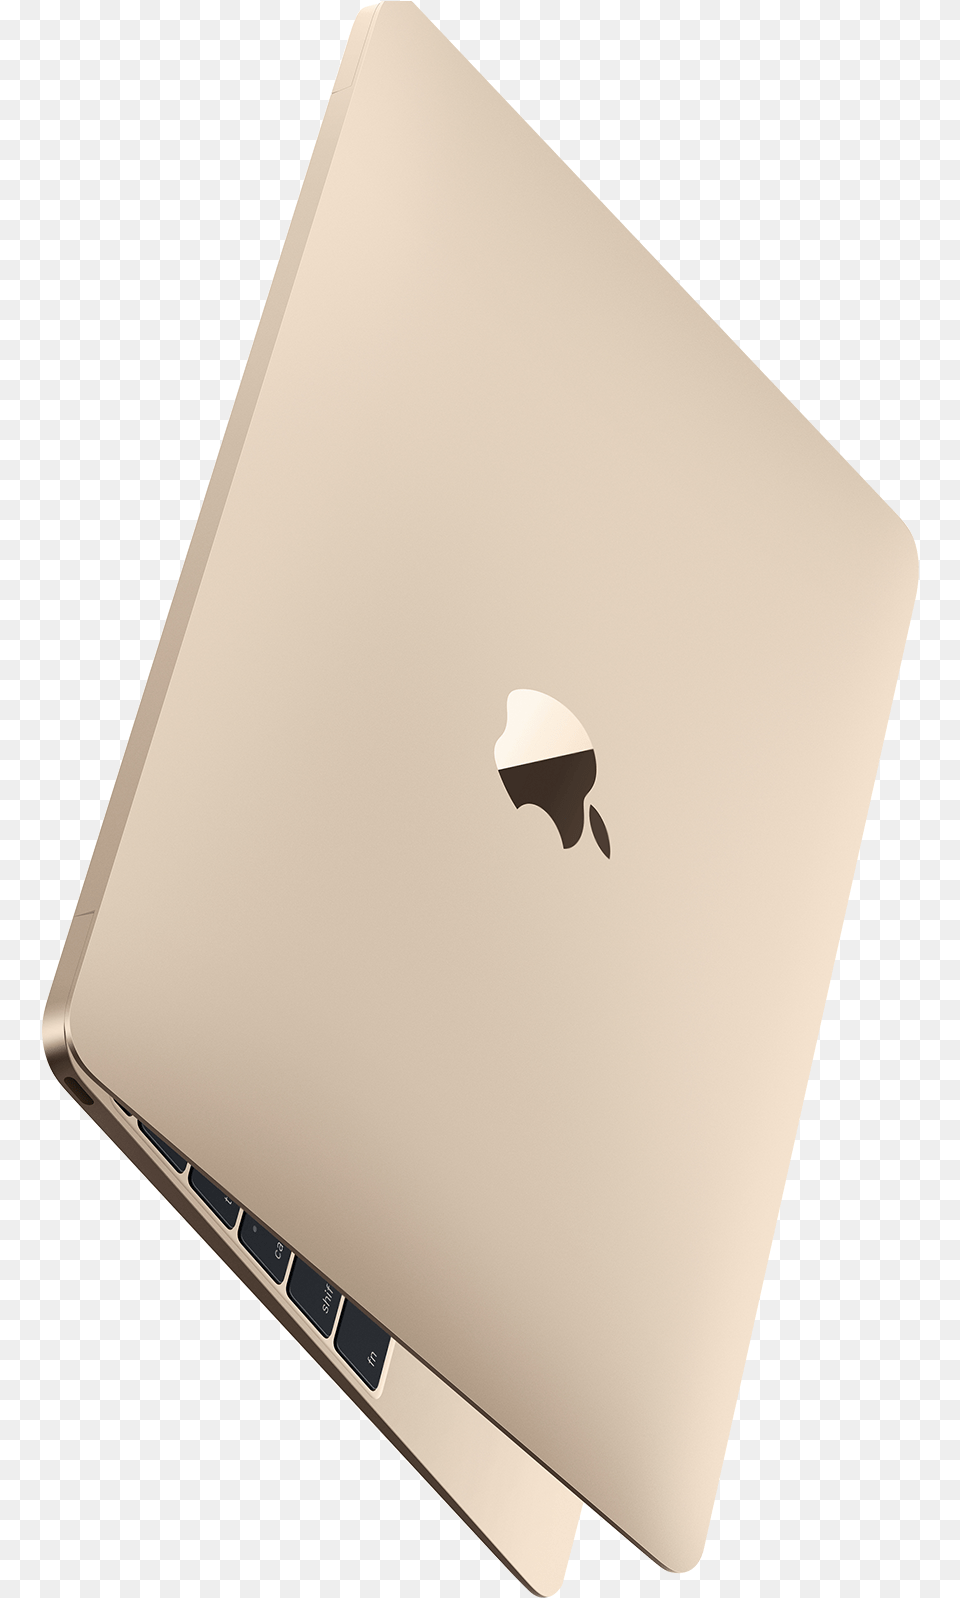 Inch Macbook Imore Macbook Air 13 2019 Gold, Computer, Electronics, Laptop, Pc Png Image